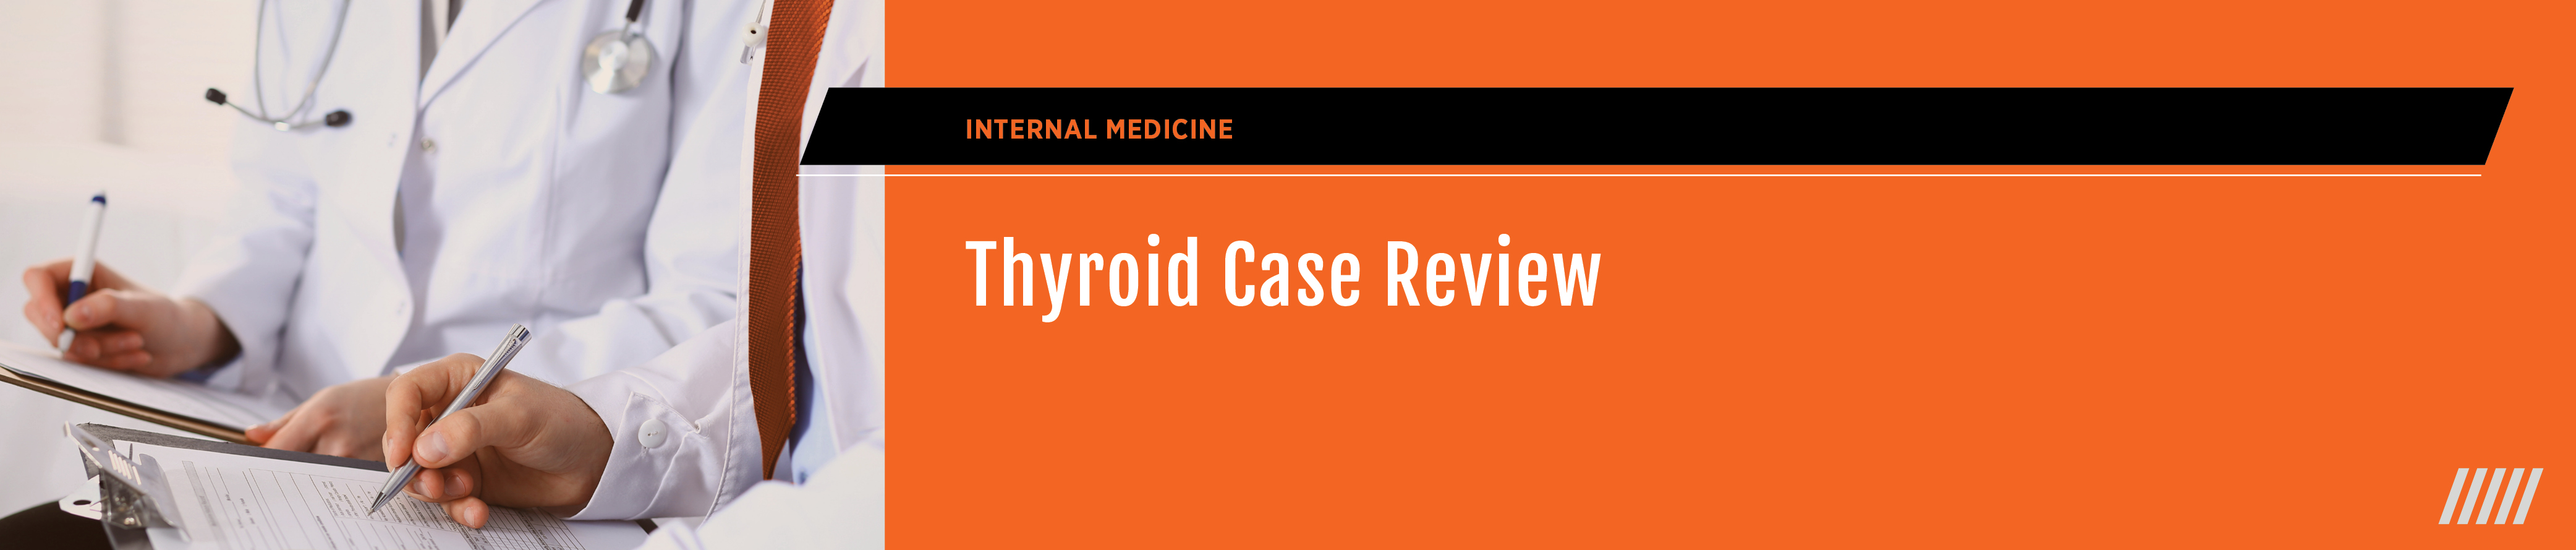 Thyroid Case Review Banner